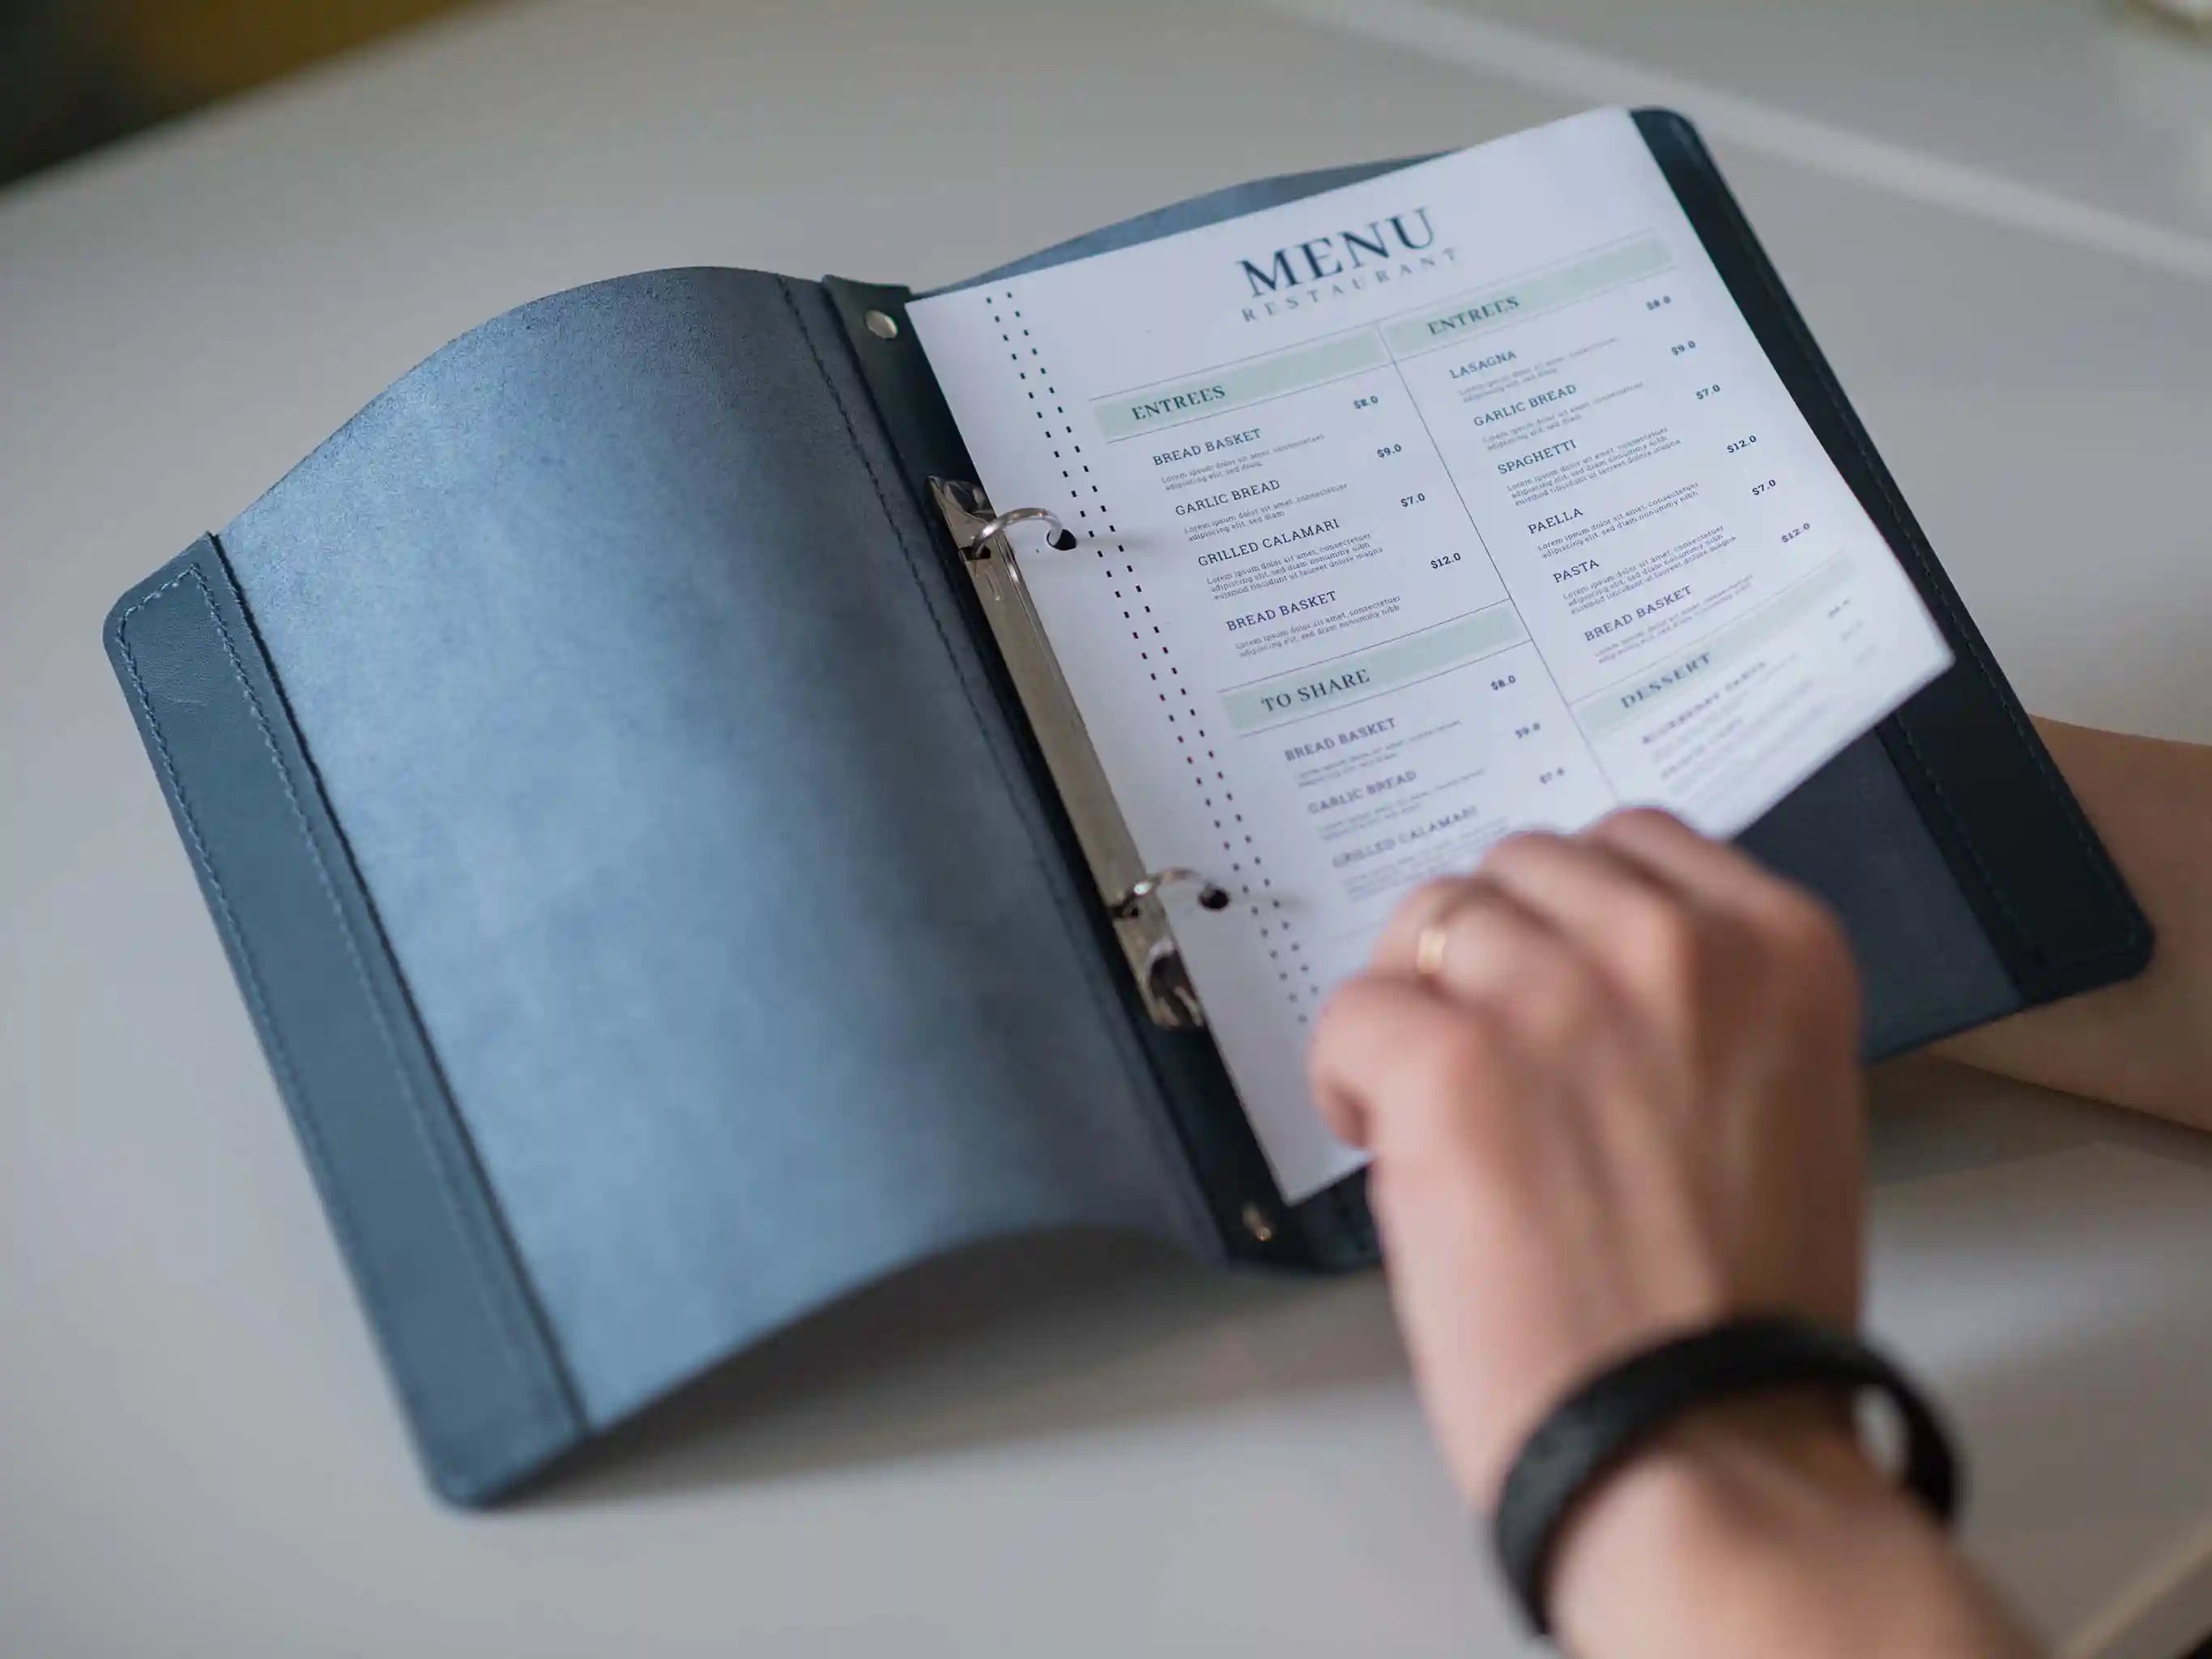 Tailored Custom Menu Folio, designed to showcase your menu offerings with style, reflects the commitment to excellence that defines your restaurant.